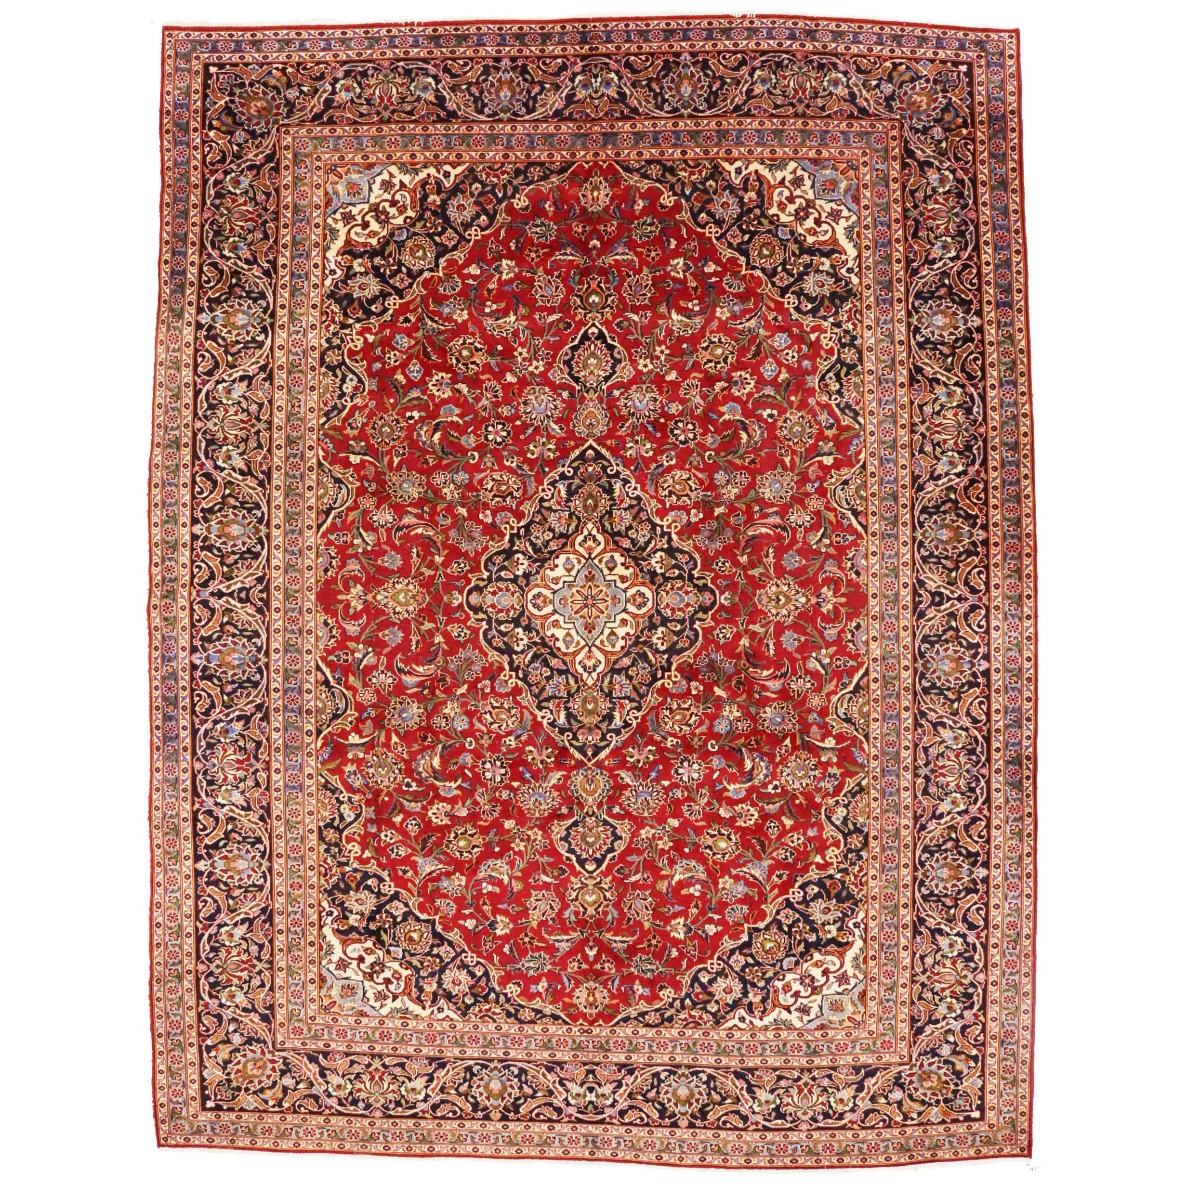 Semi Antique Vintage Traditional Classic Floral Large 10X13 Hand-Knotted Handmade Oriental Rug Carpet